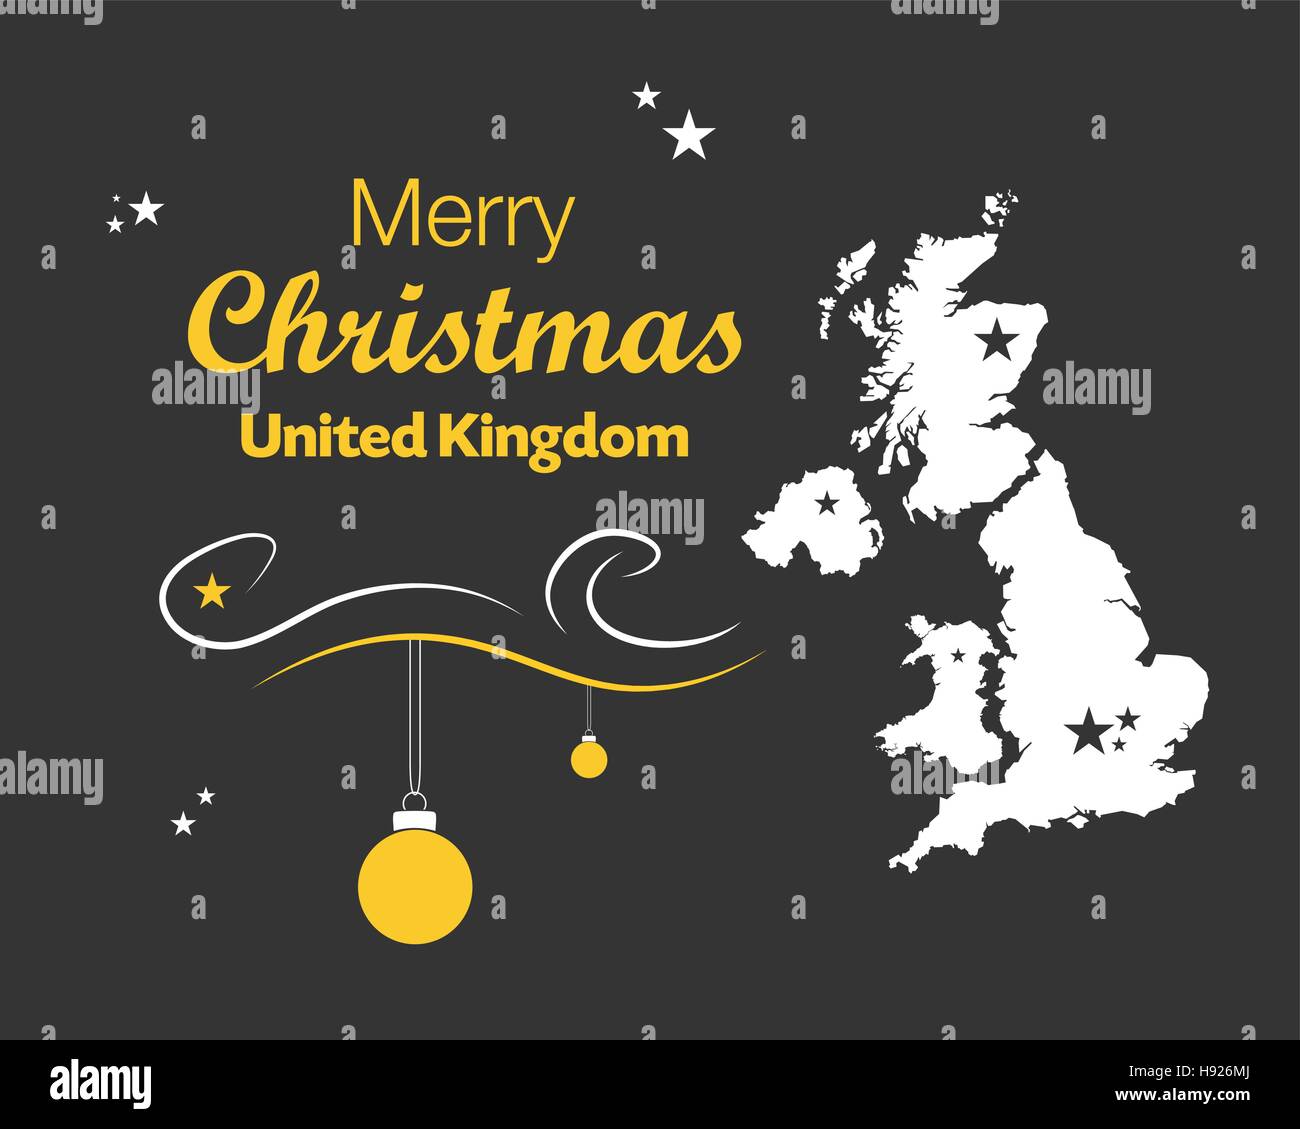 Merry Christmas illustration theme with map of United Kingdom Stock Vector